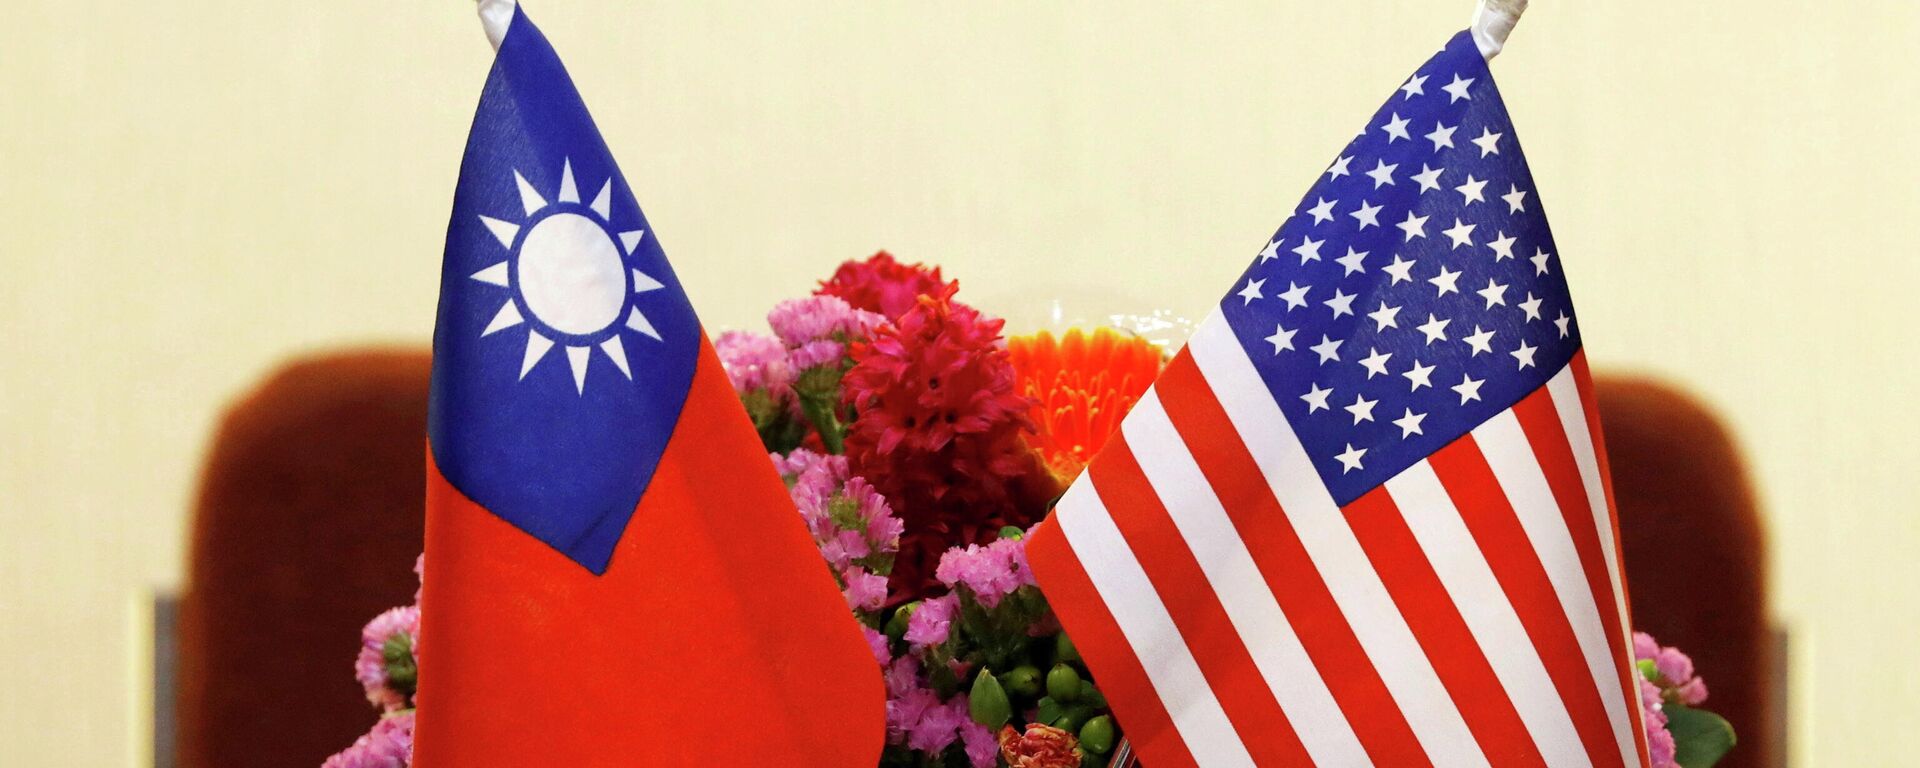 Flags of Taiwan and U.S. are placed for a meeting in Taipei, Taiwan March 27, 2018. - Sputnik International, 1920, 18.11.2021